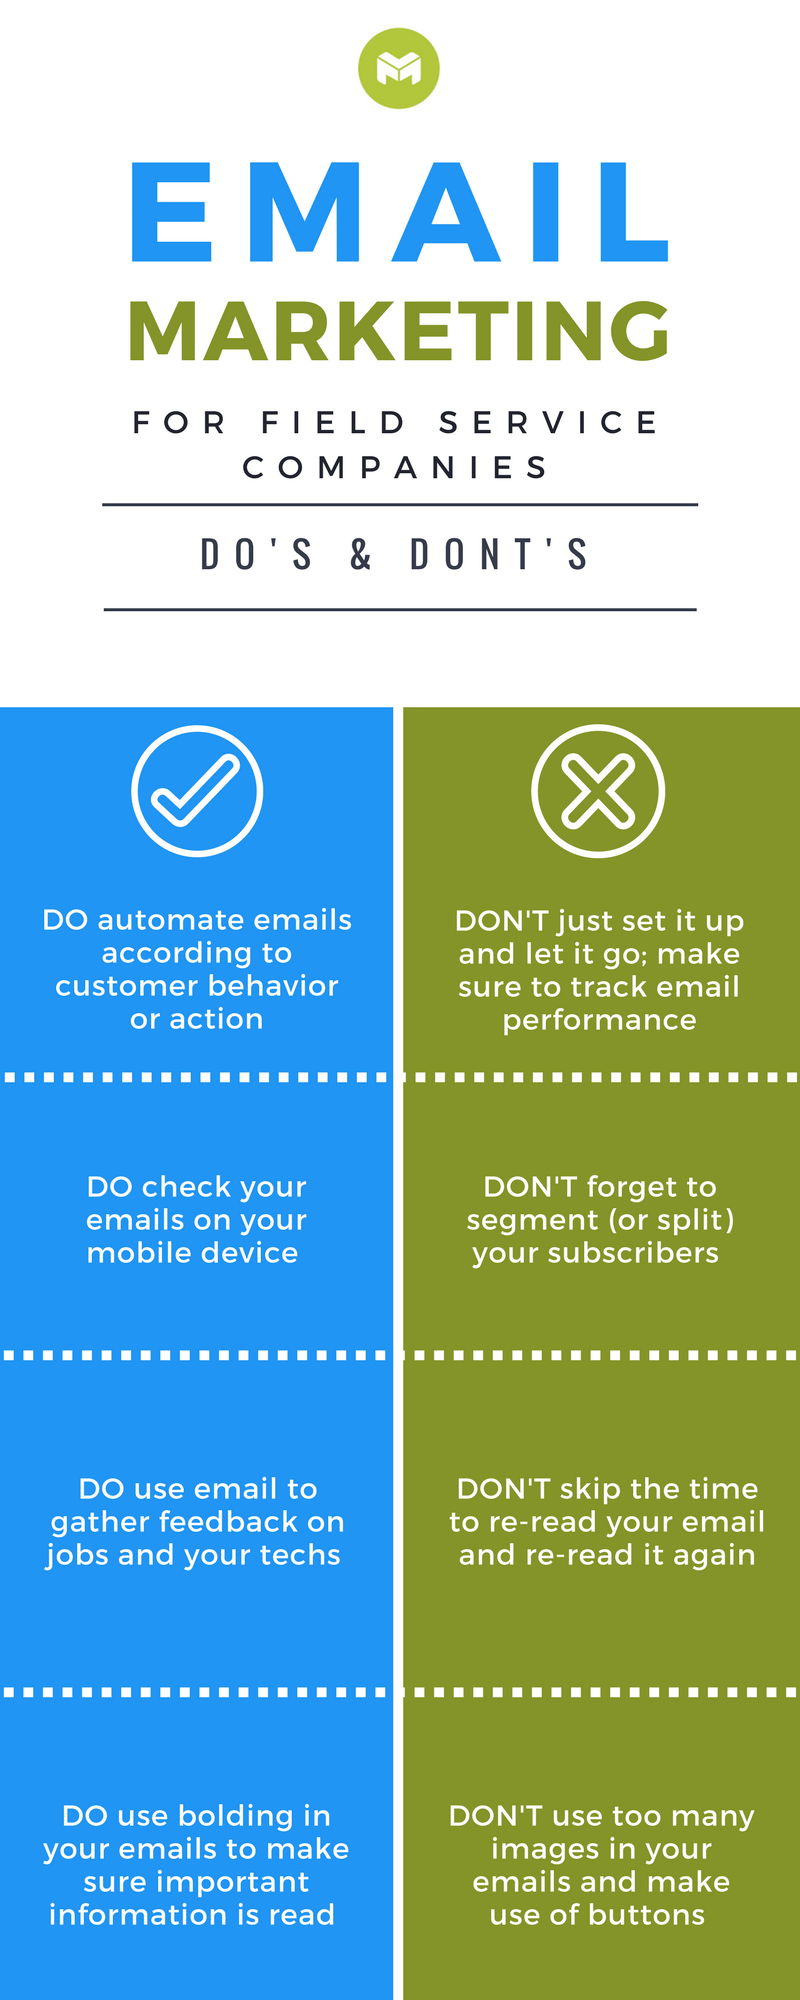 Email Marketing for Field Service Companies